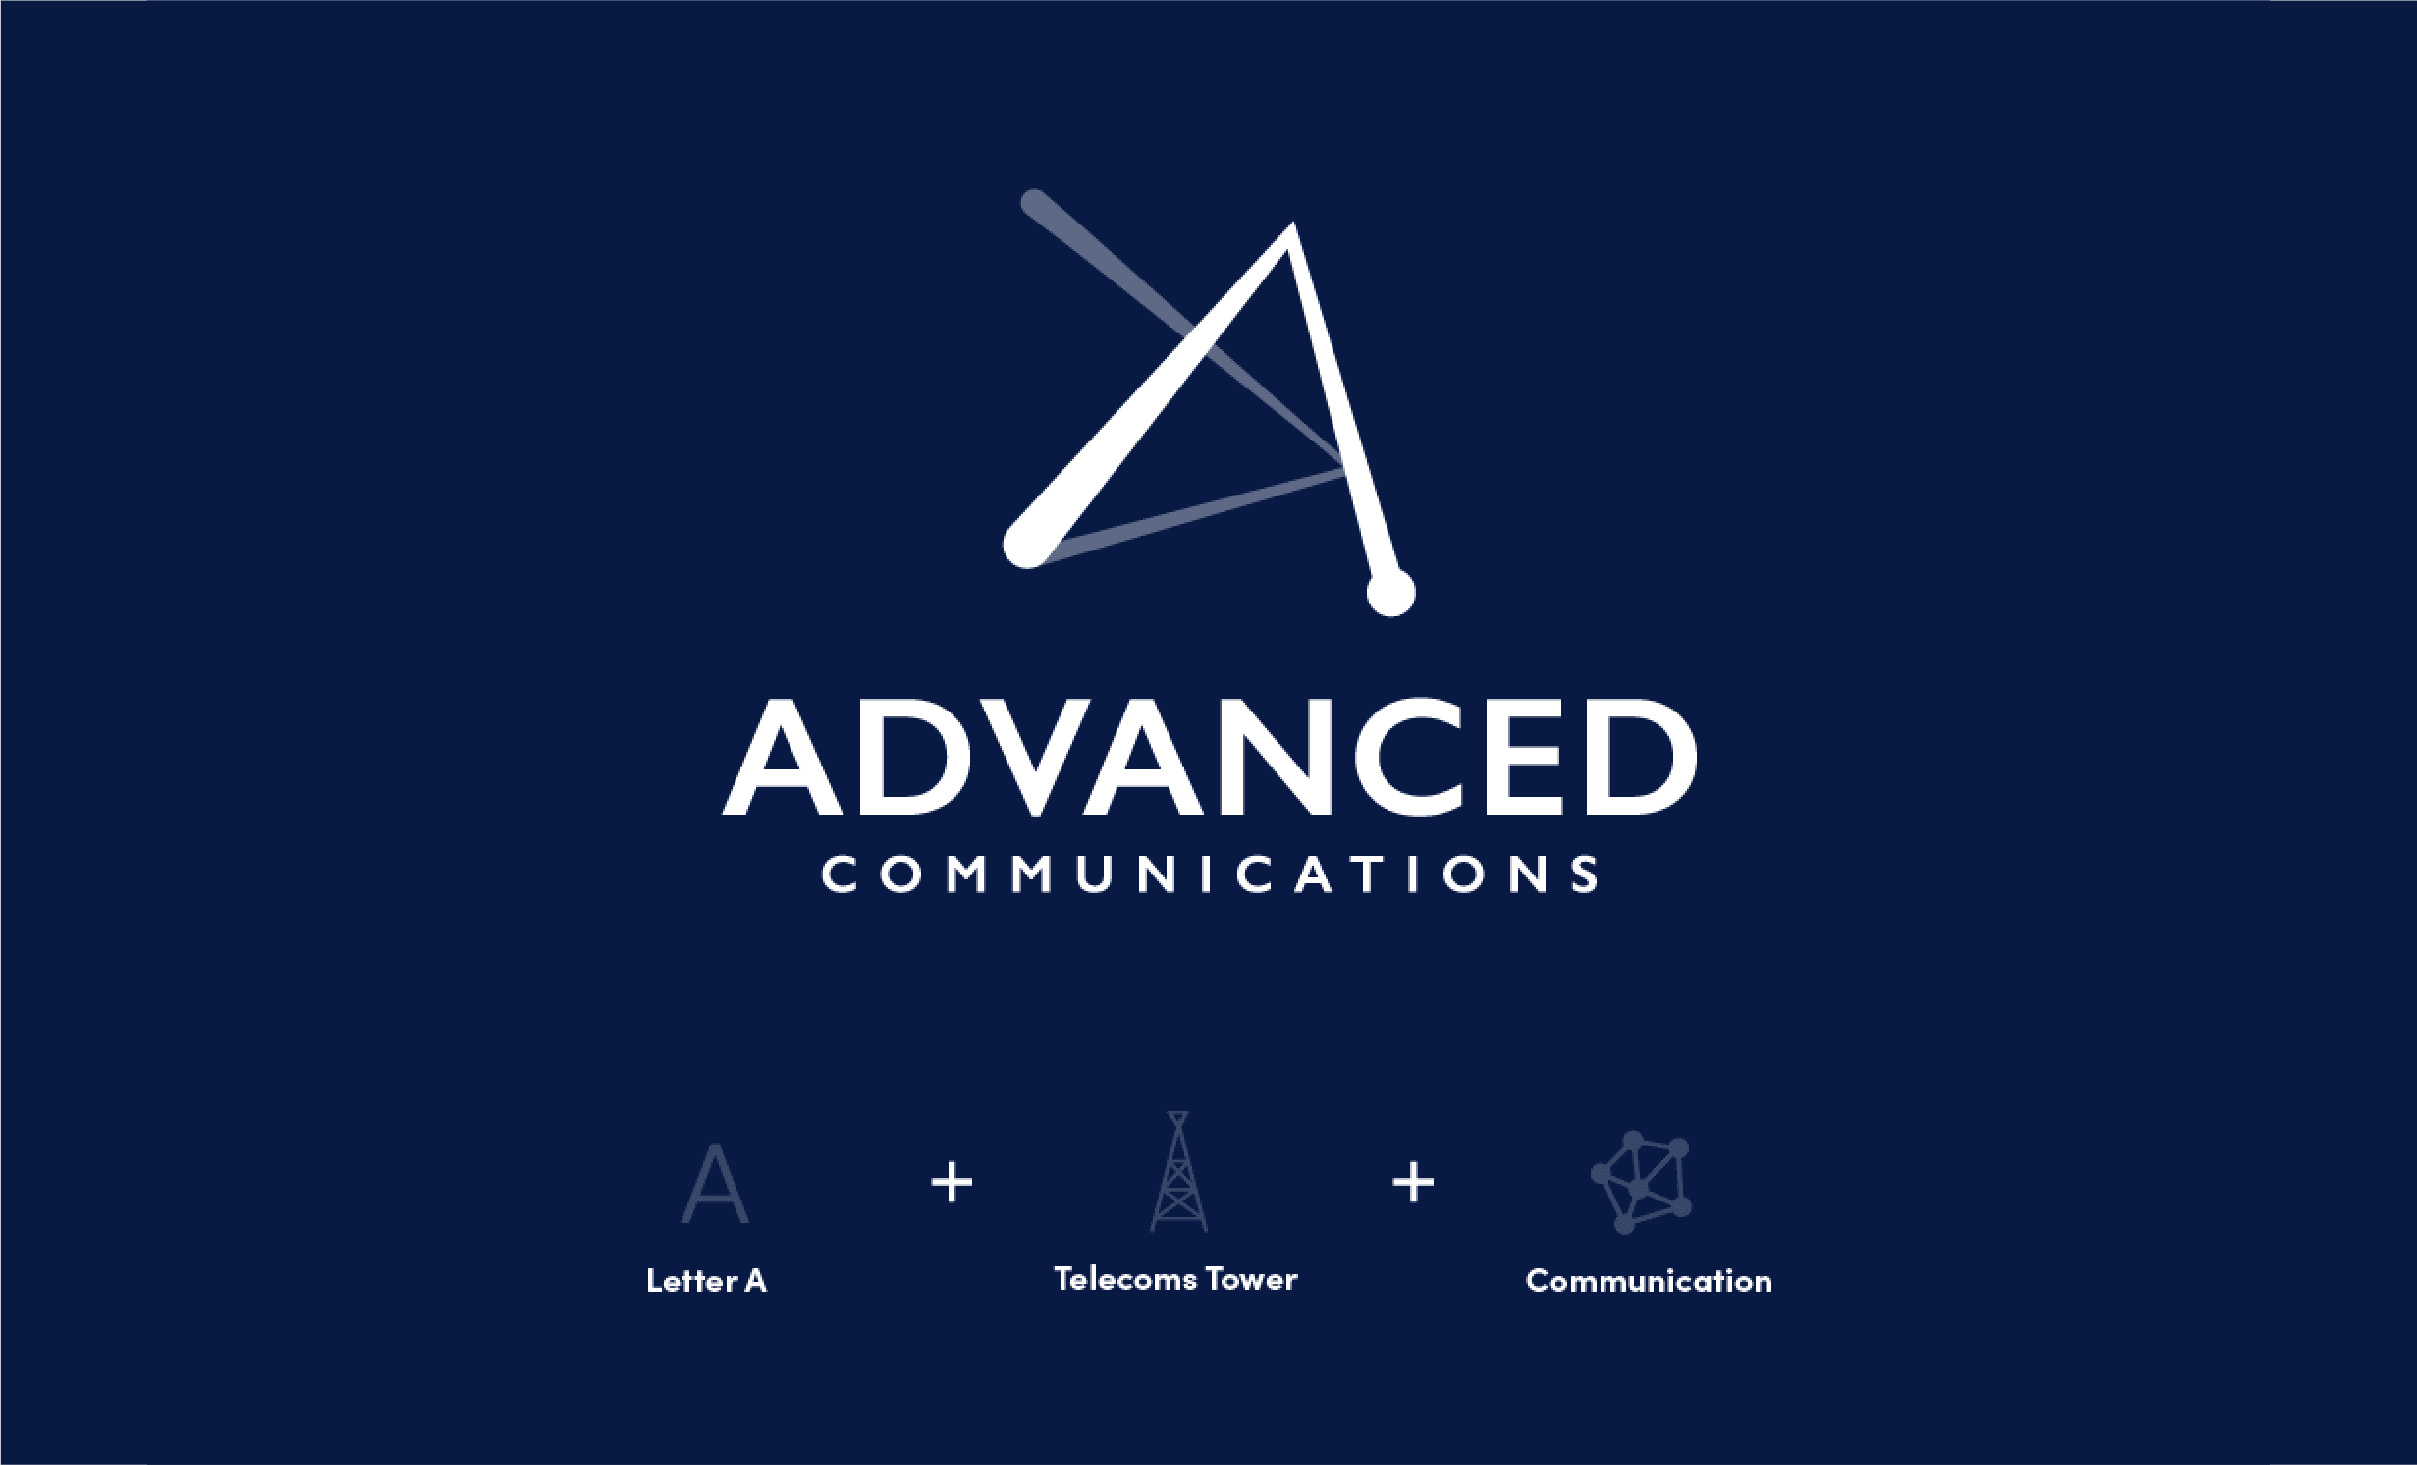 Advanced Communication – Using branding to level up the business game